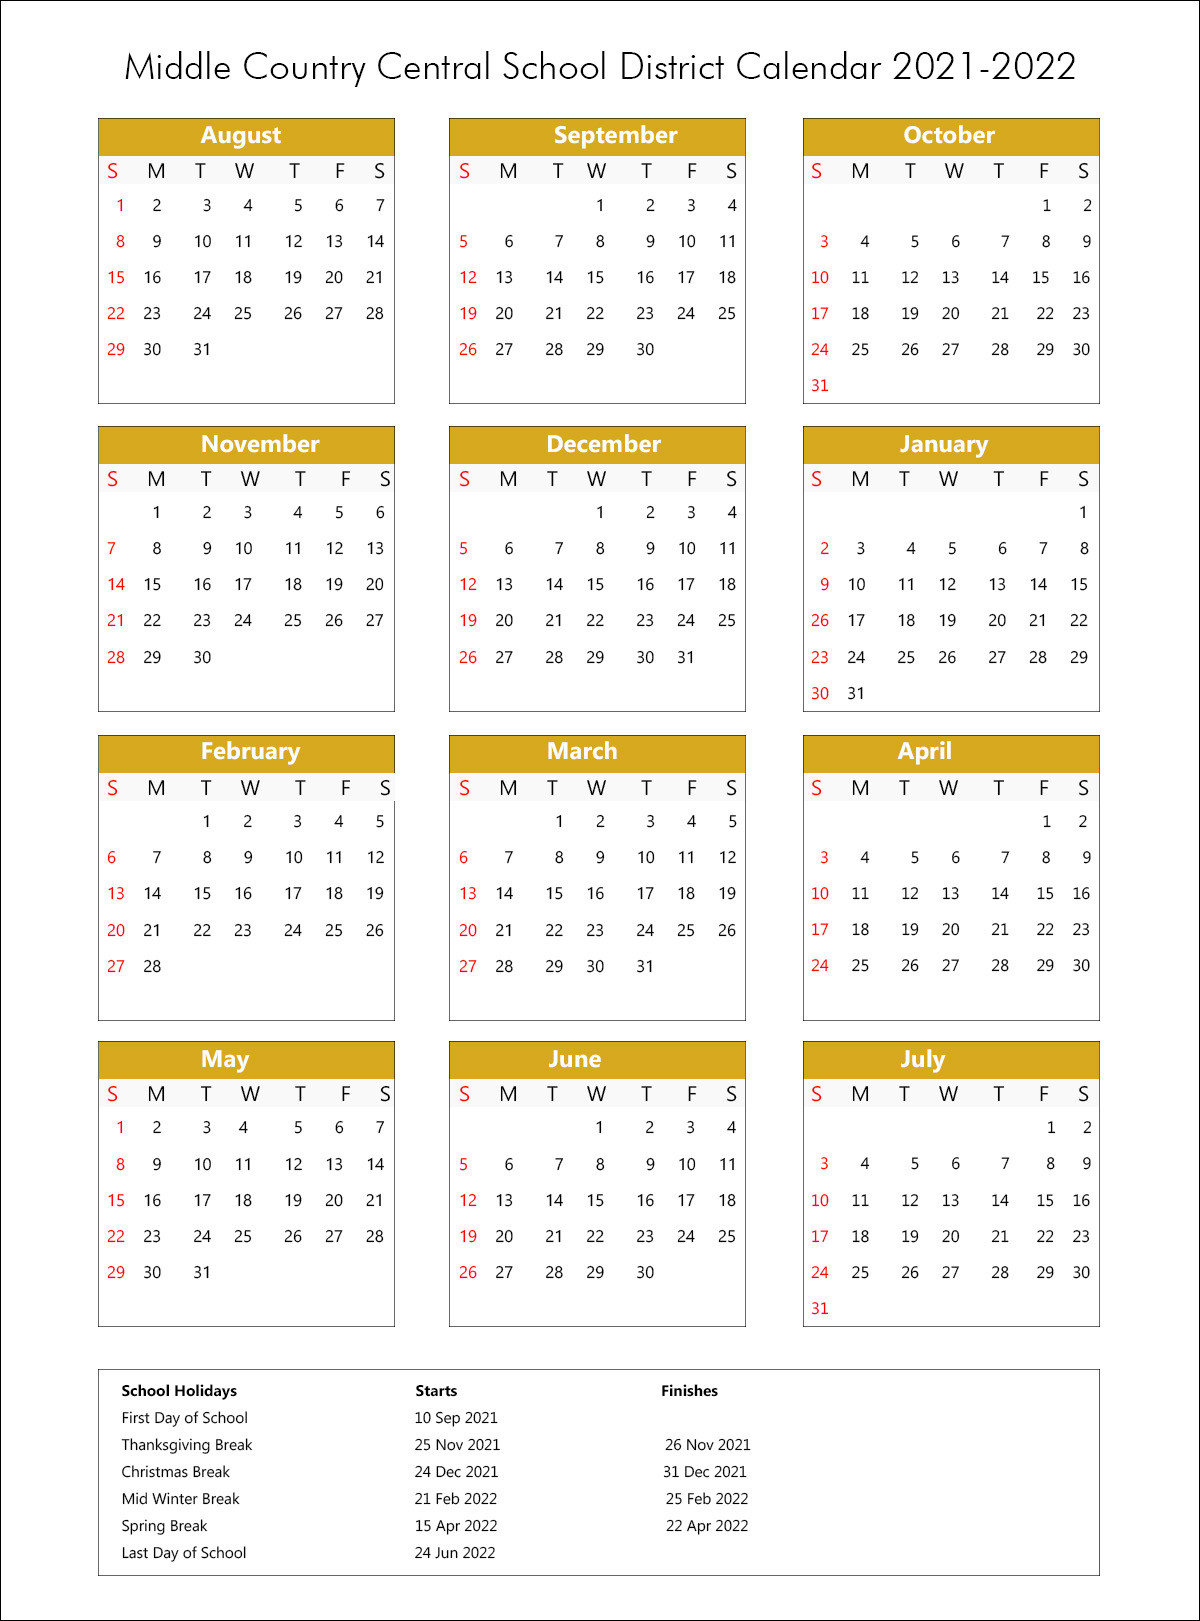 Middle Country Central School District Calendar Holidays 2021-2022-School Calendar 2021 To 2022 New York